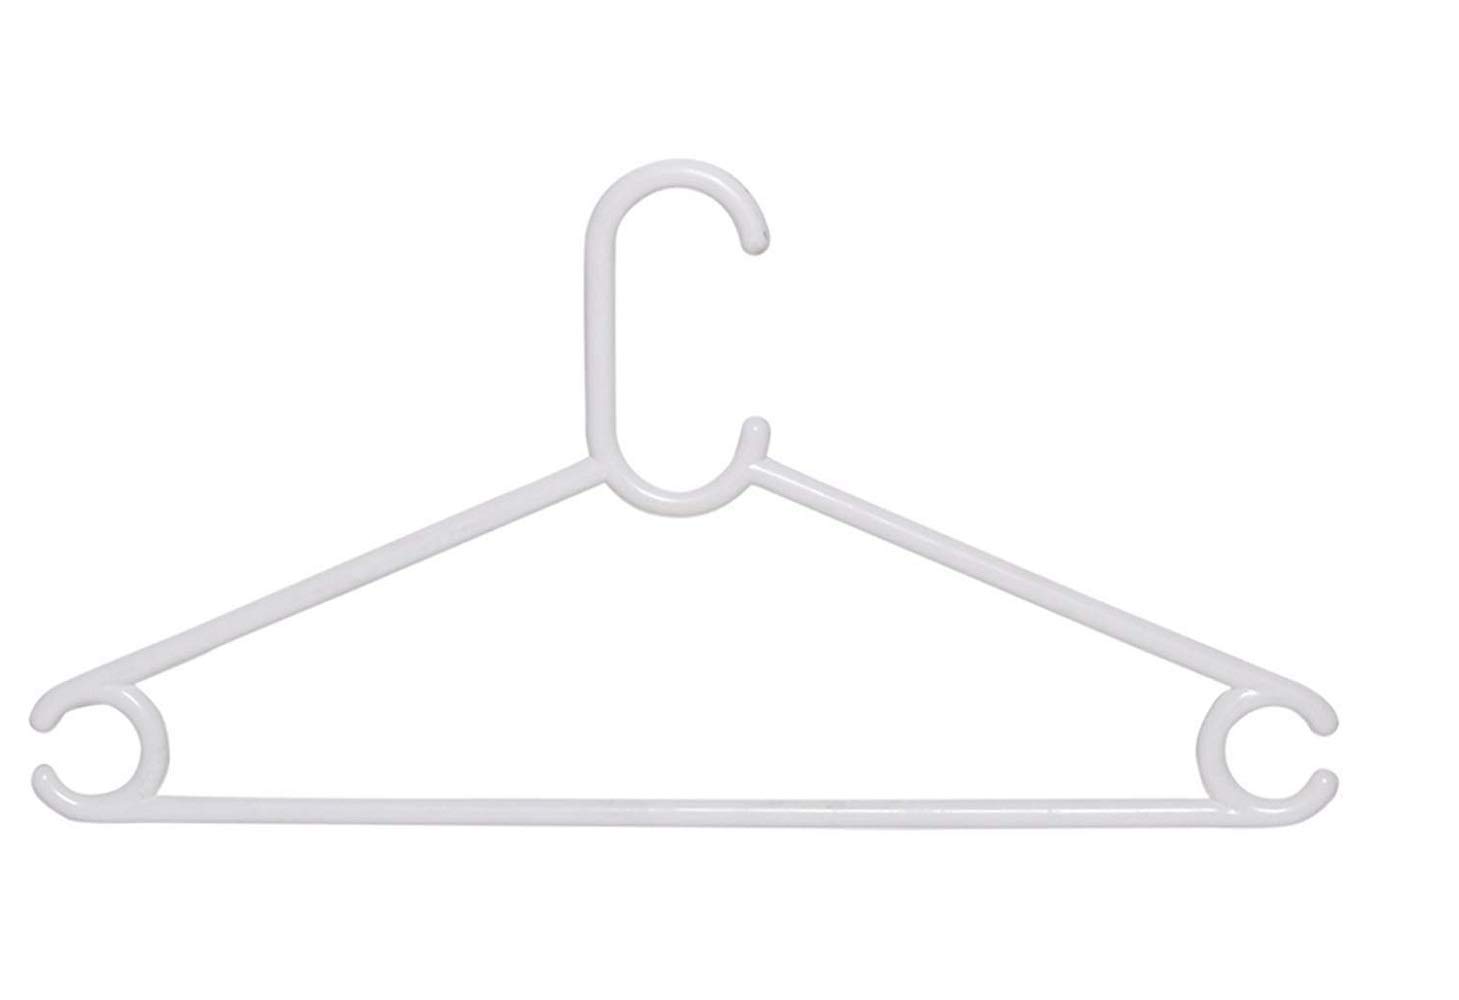 Say Yes to Order: Plastic Clothes Hangers for a Neat Closet